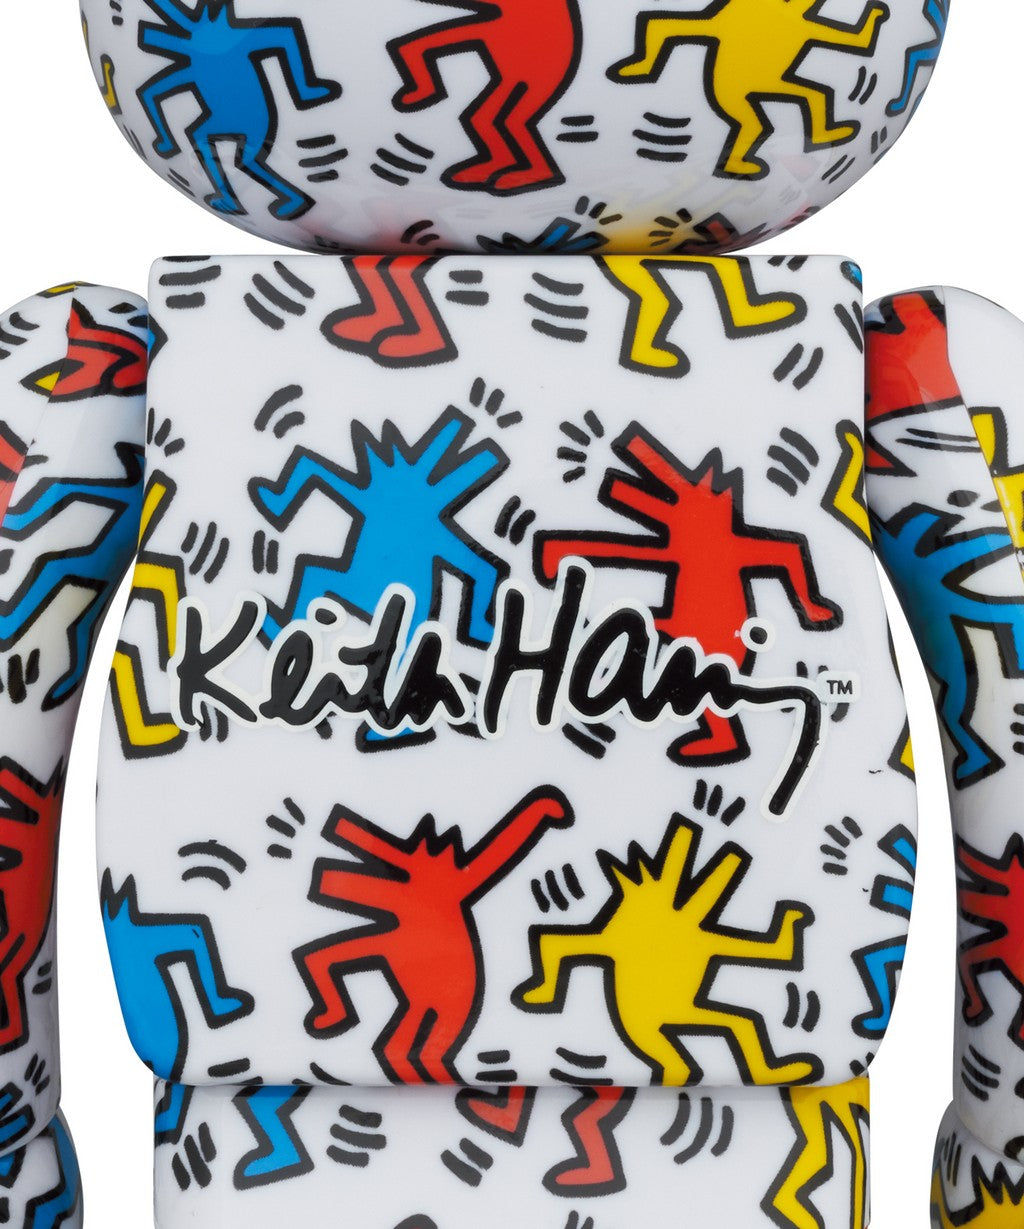 Keith Haring: BE@RBRICK v9 (Dancing Dogs) 100% & 400% Figure set - Art Toy, be@rbrick, dancing dogs, exceptional collecting, Keith Haring, limited edition, new arrival, New Arrivals - Gadgetz Home